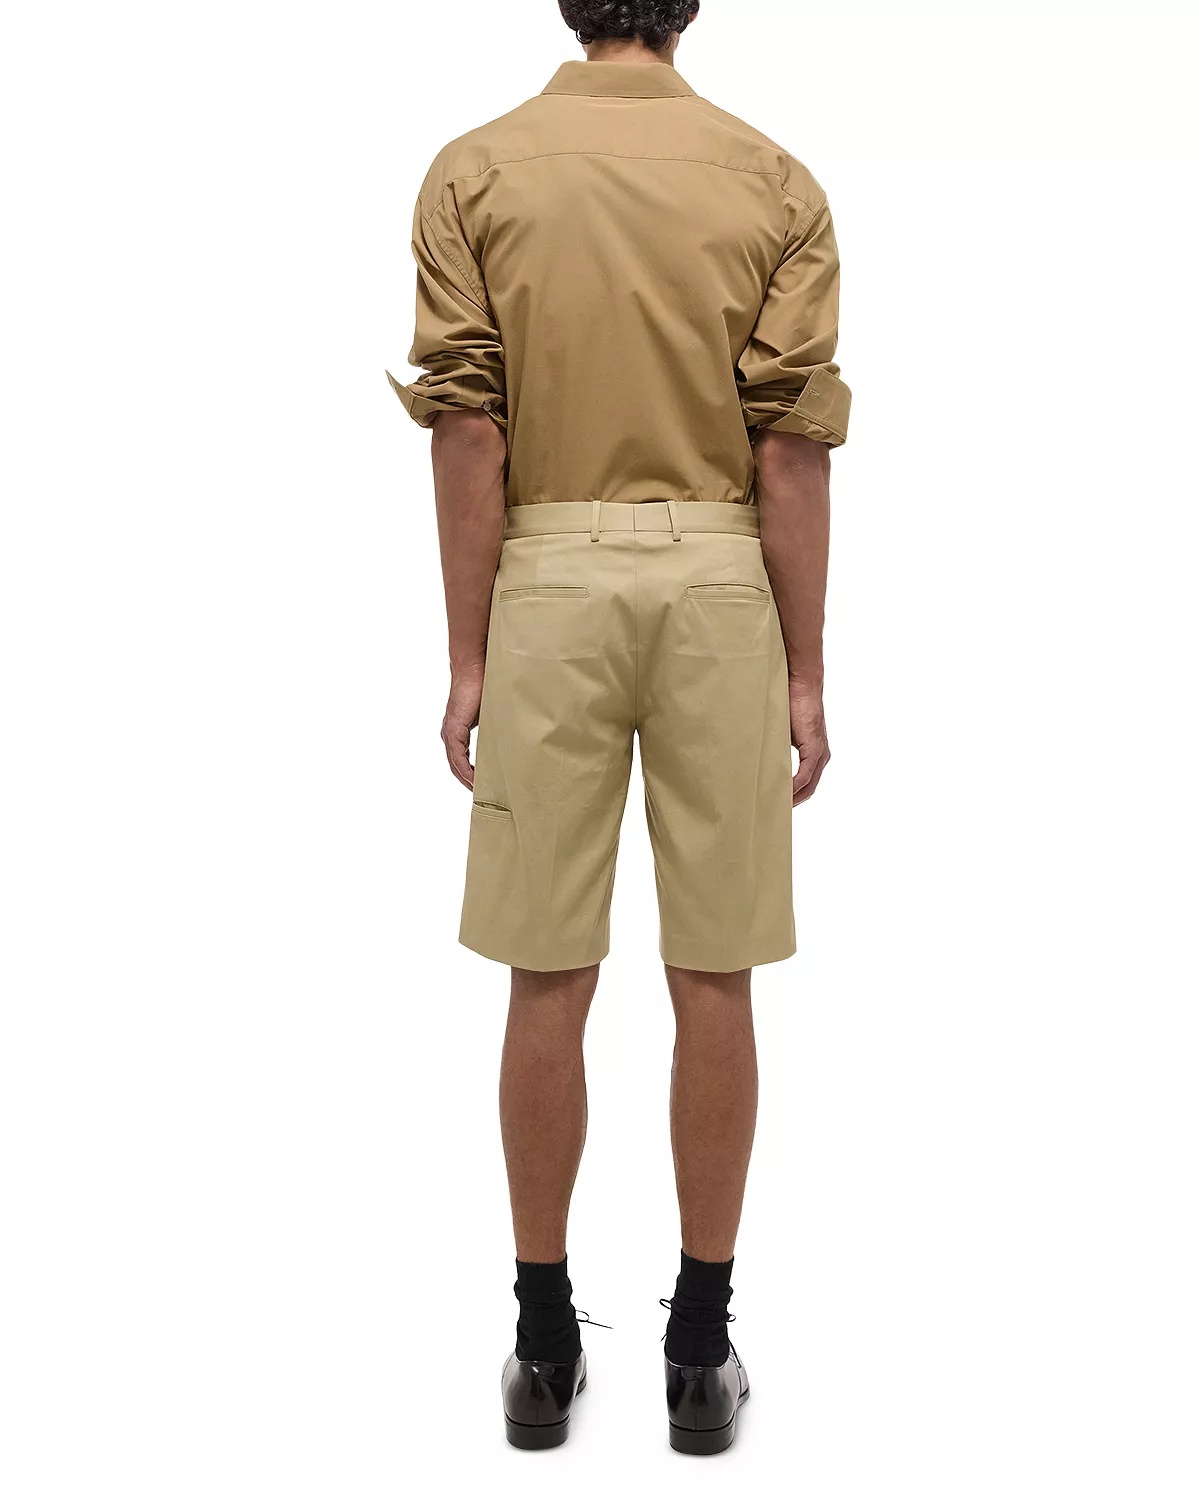 Relaxed Fit 9" Carpenter Shorts - 3